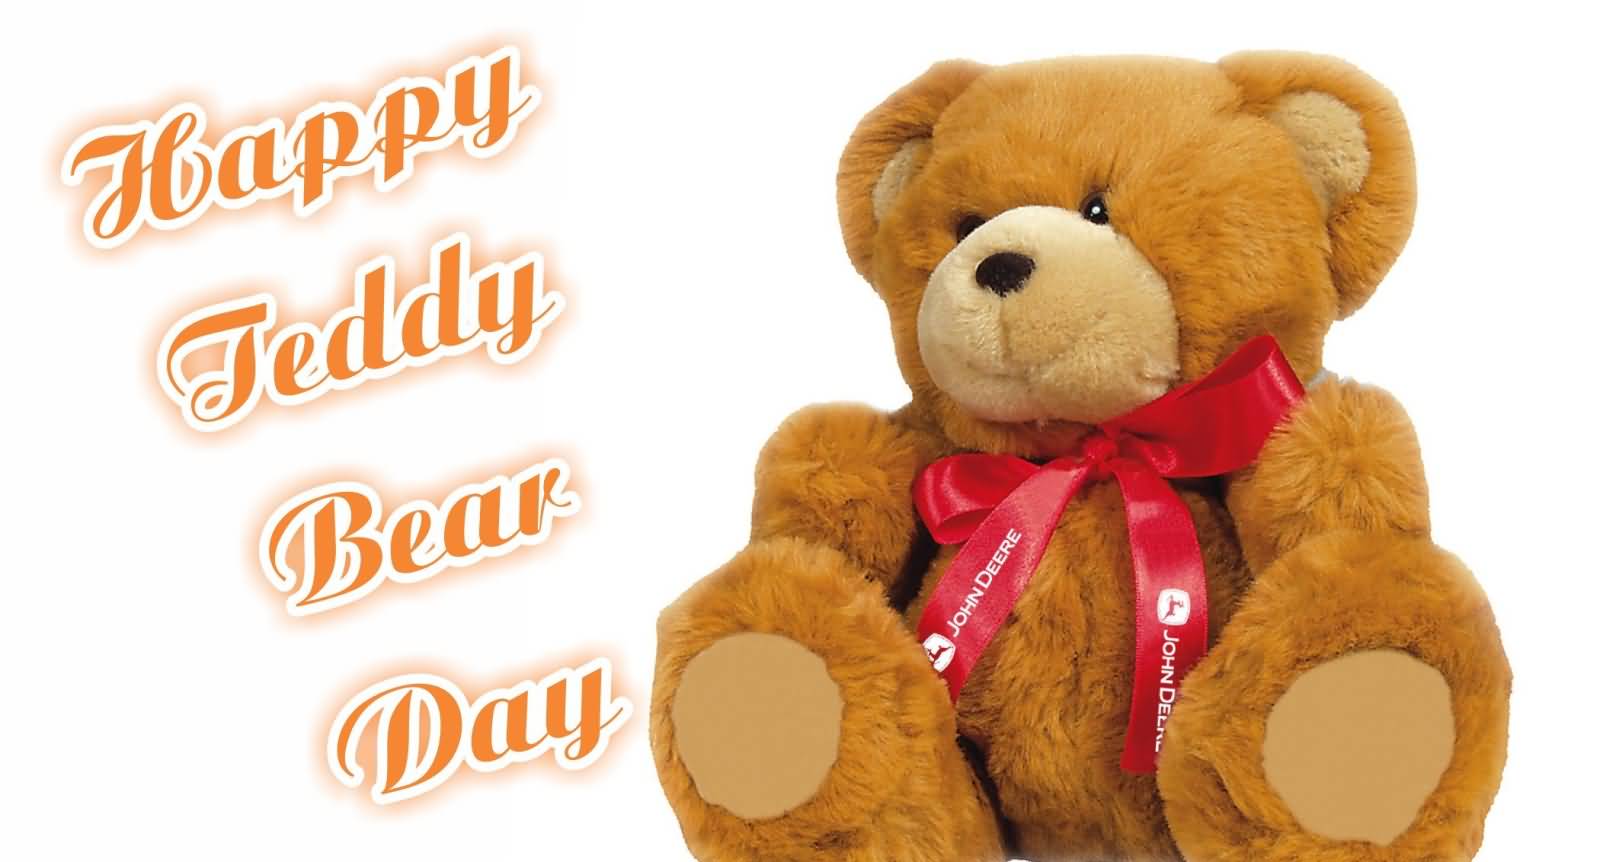 Happy Teddy Bear Day Picture